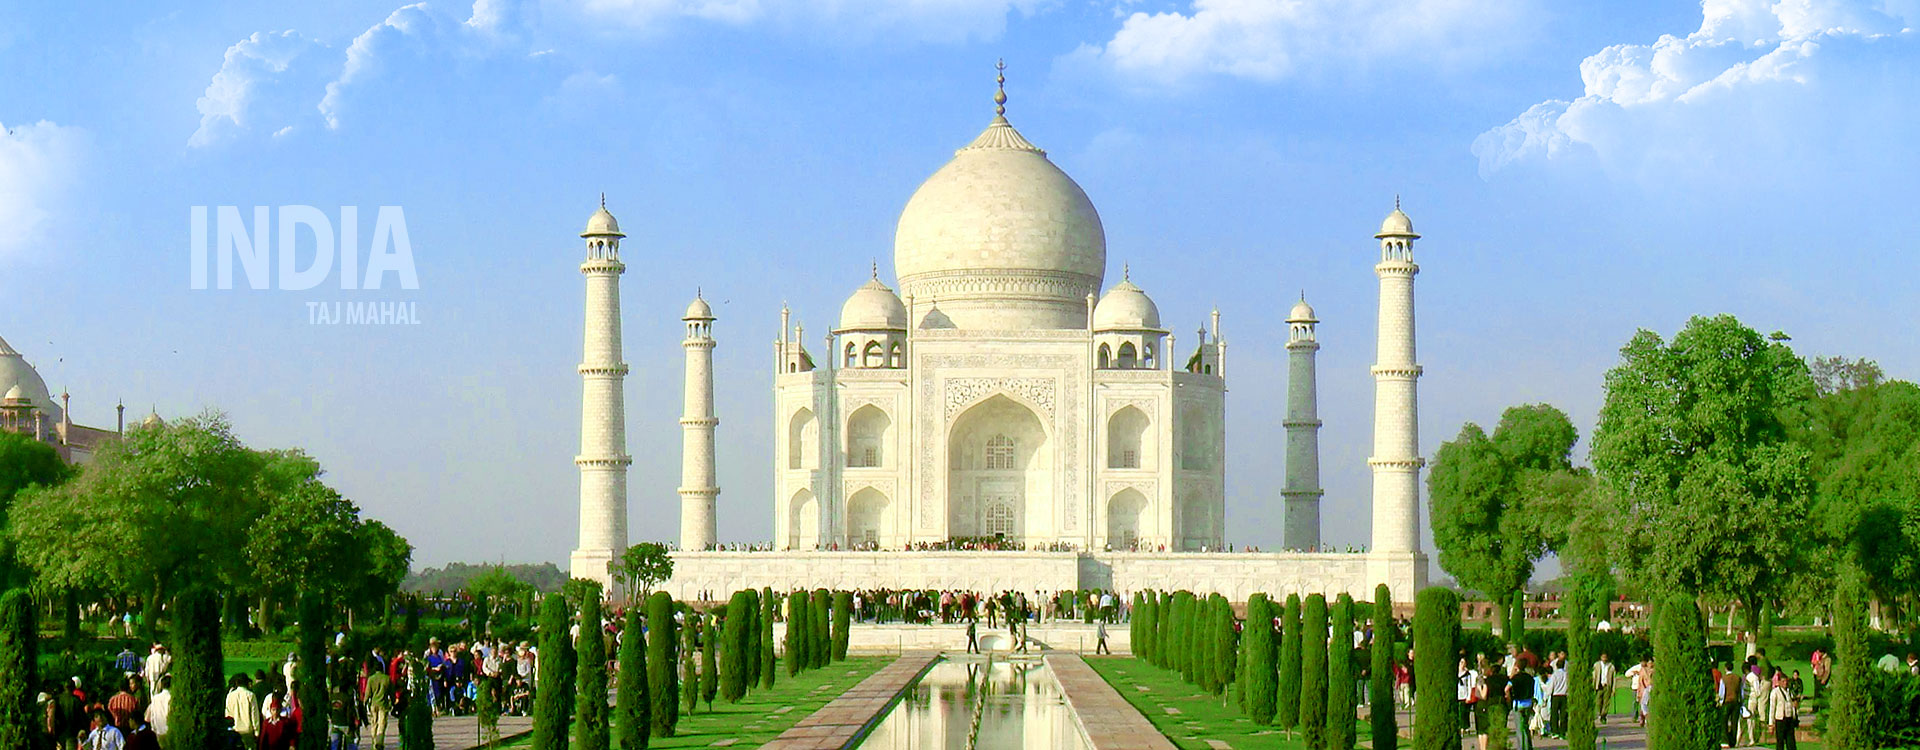 Venture out and holiday in India's most beautiful Taj Mahal